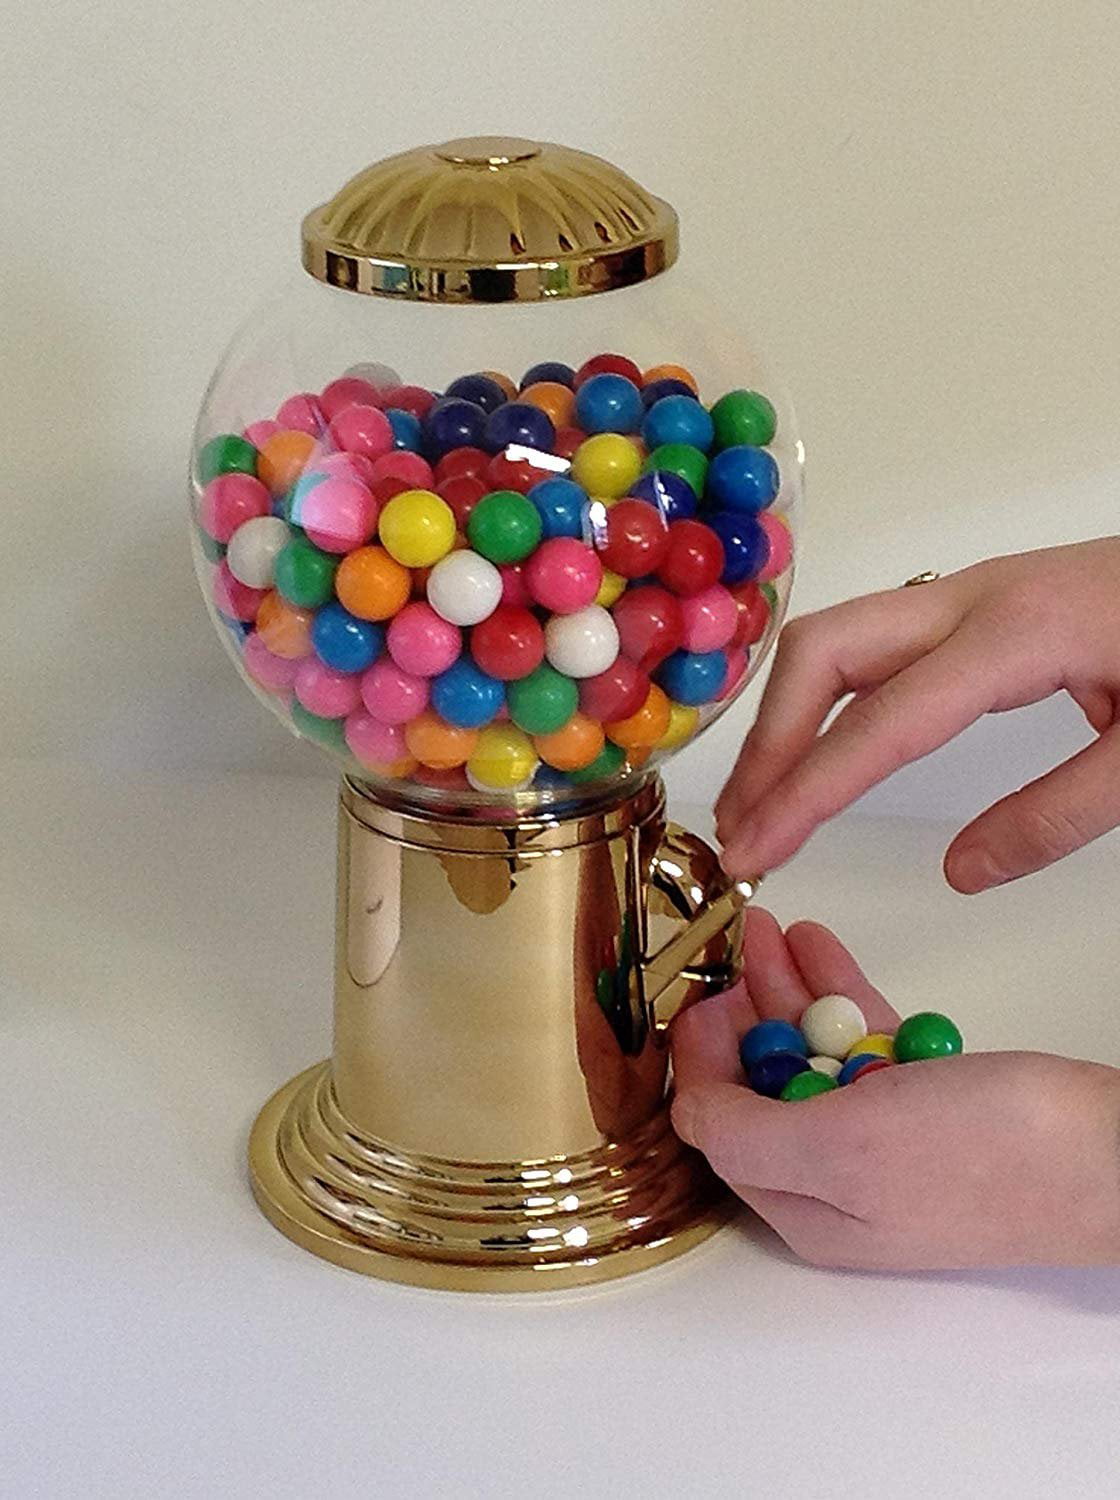 Godinger 9- Inch Refillable Glass Globe Gumball Machine and Candy Dispenser  Antique Style - Gold Color